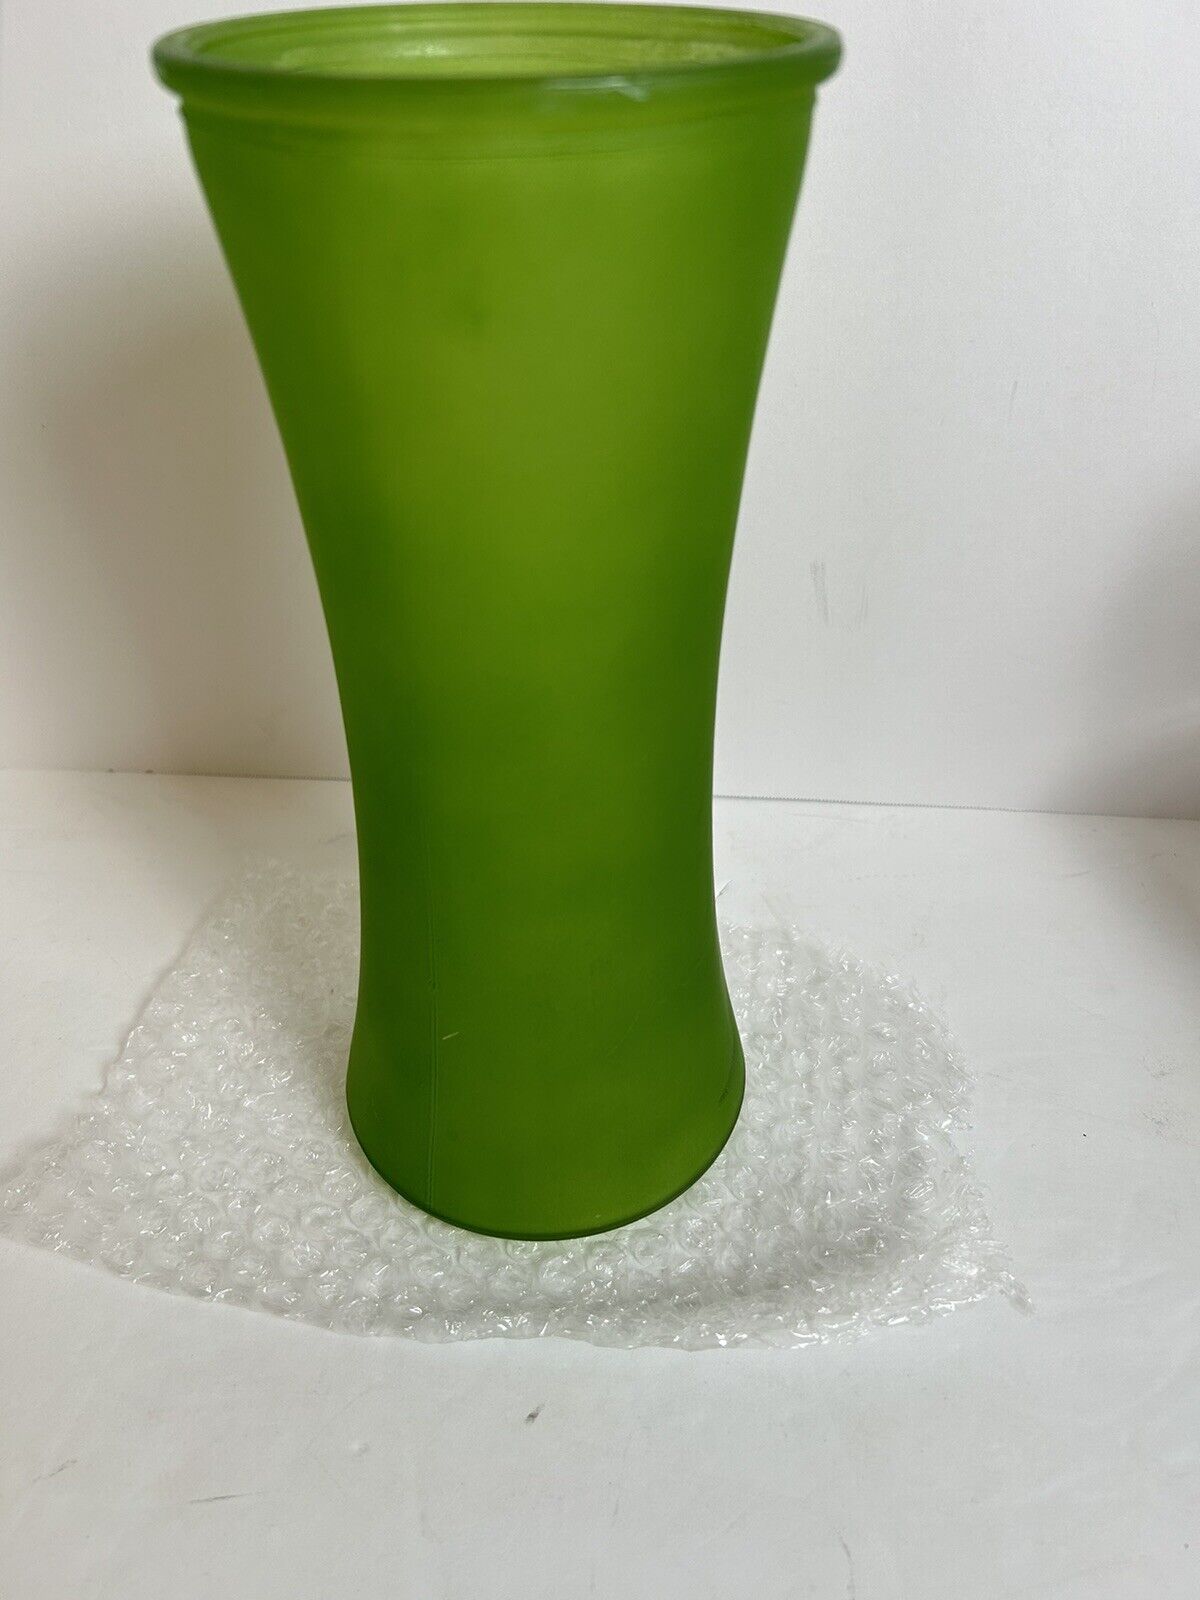 Vintage Emerald Green Glass Vase 10” Tall Used 